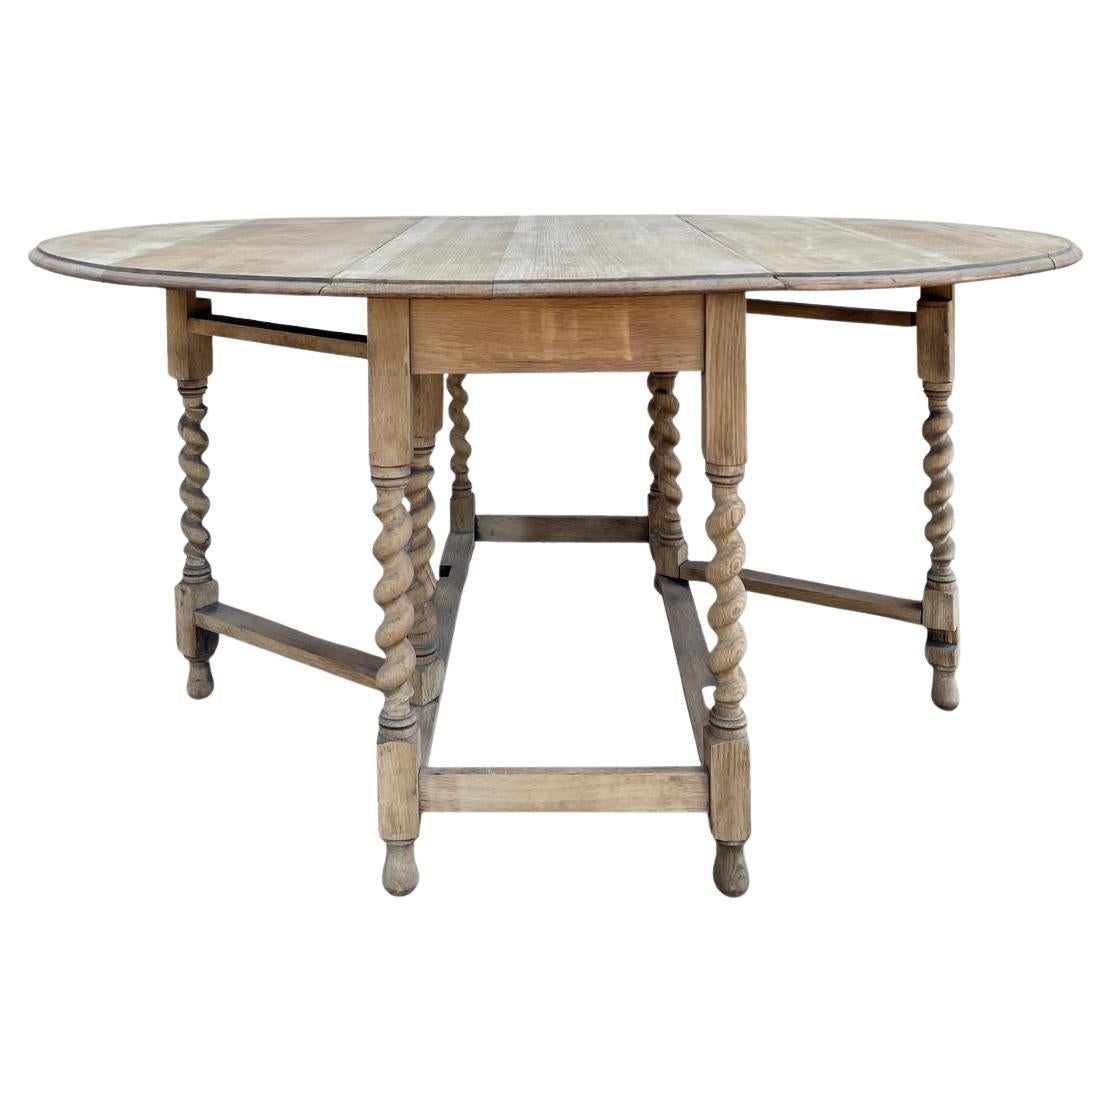 What does a gateleg table mean?